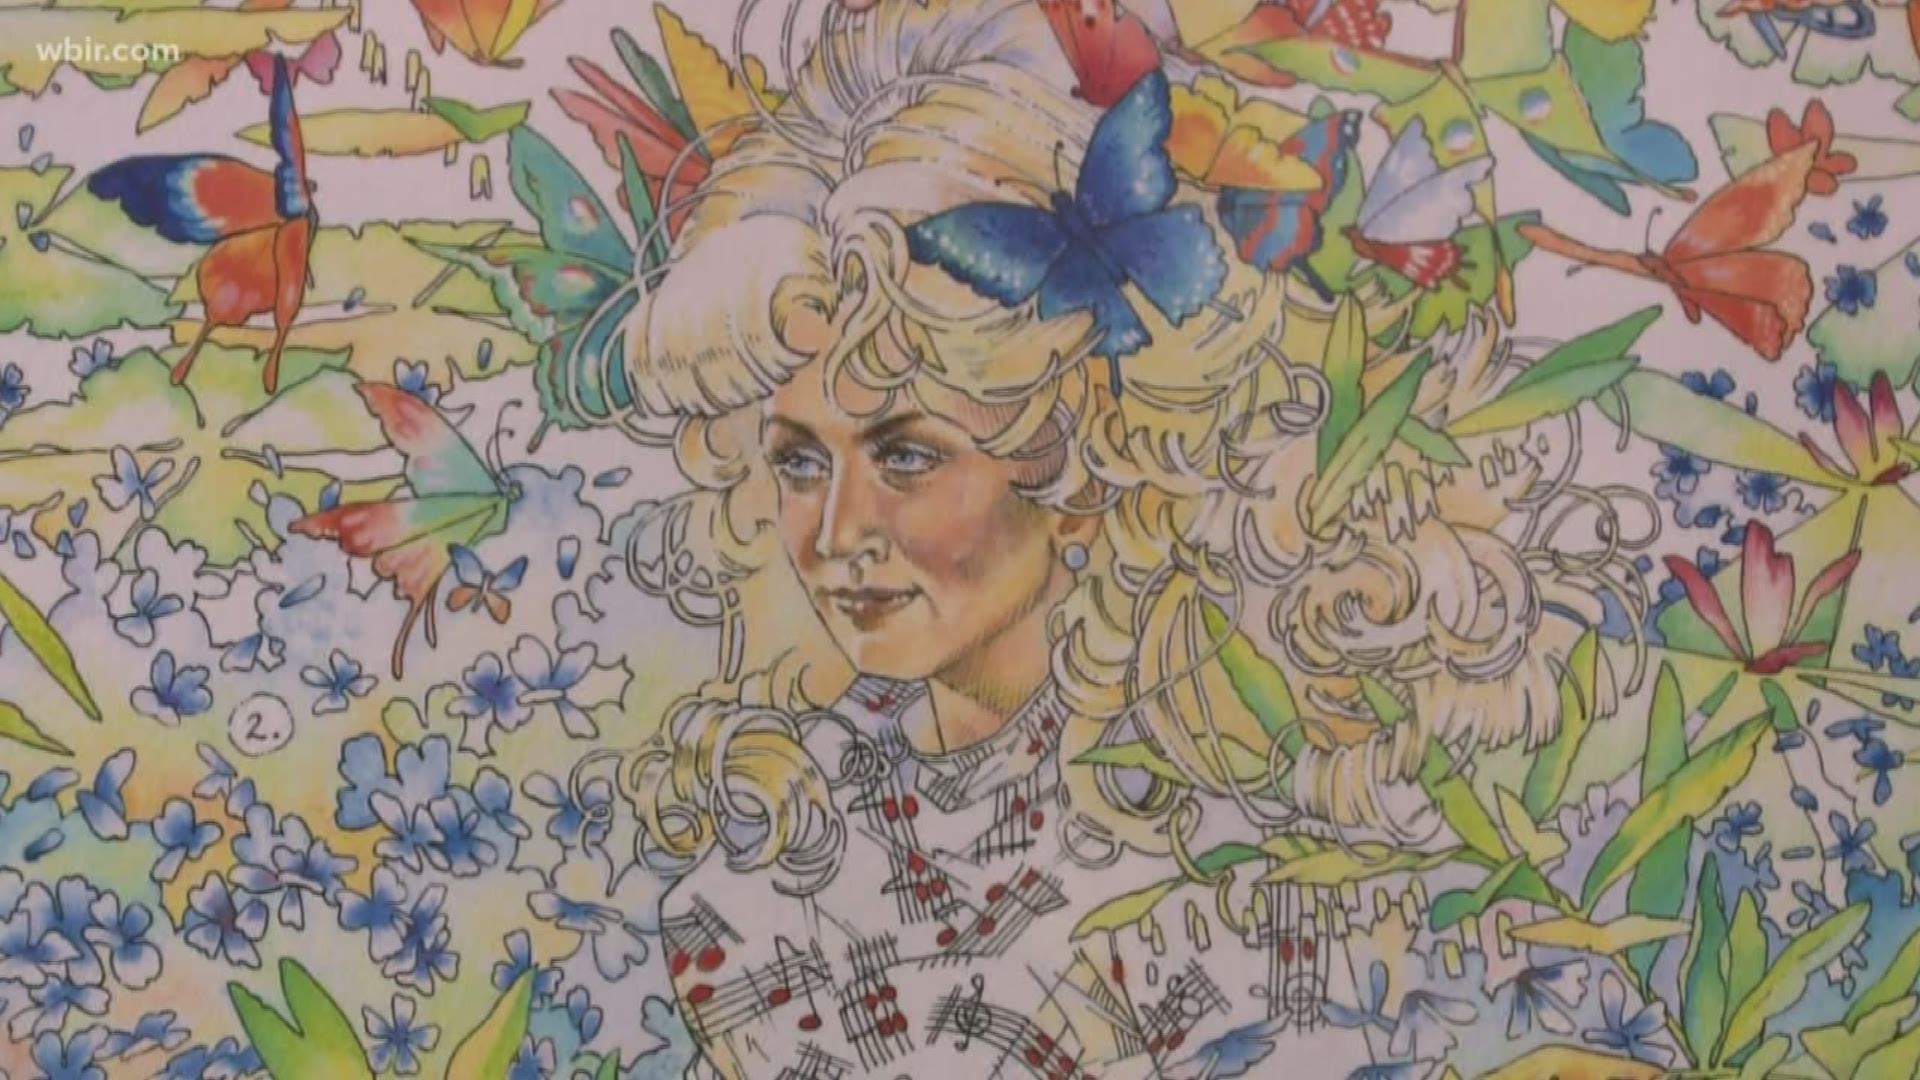 Rala Art Gallery and gift shop is hosting a Dolly Parton art contest for the second year in a row.